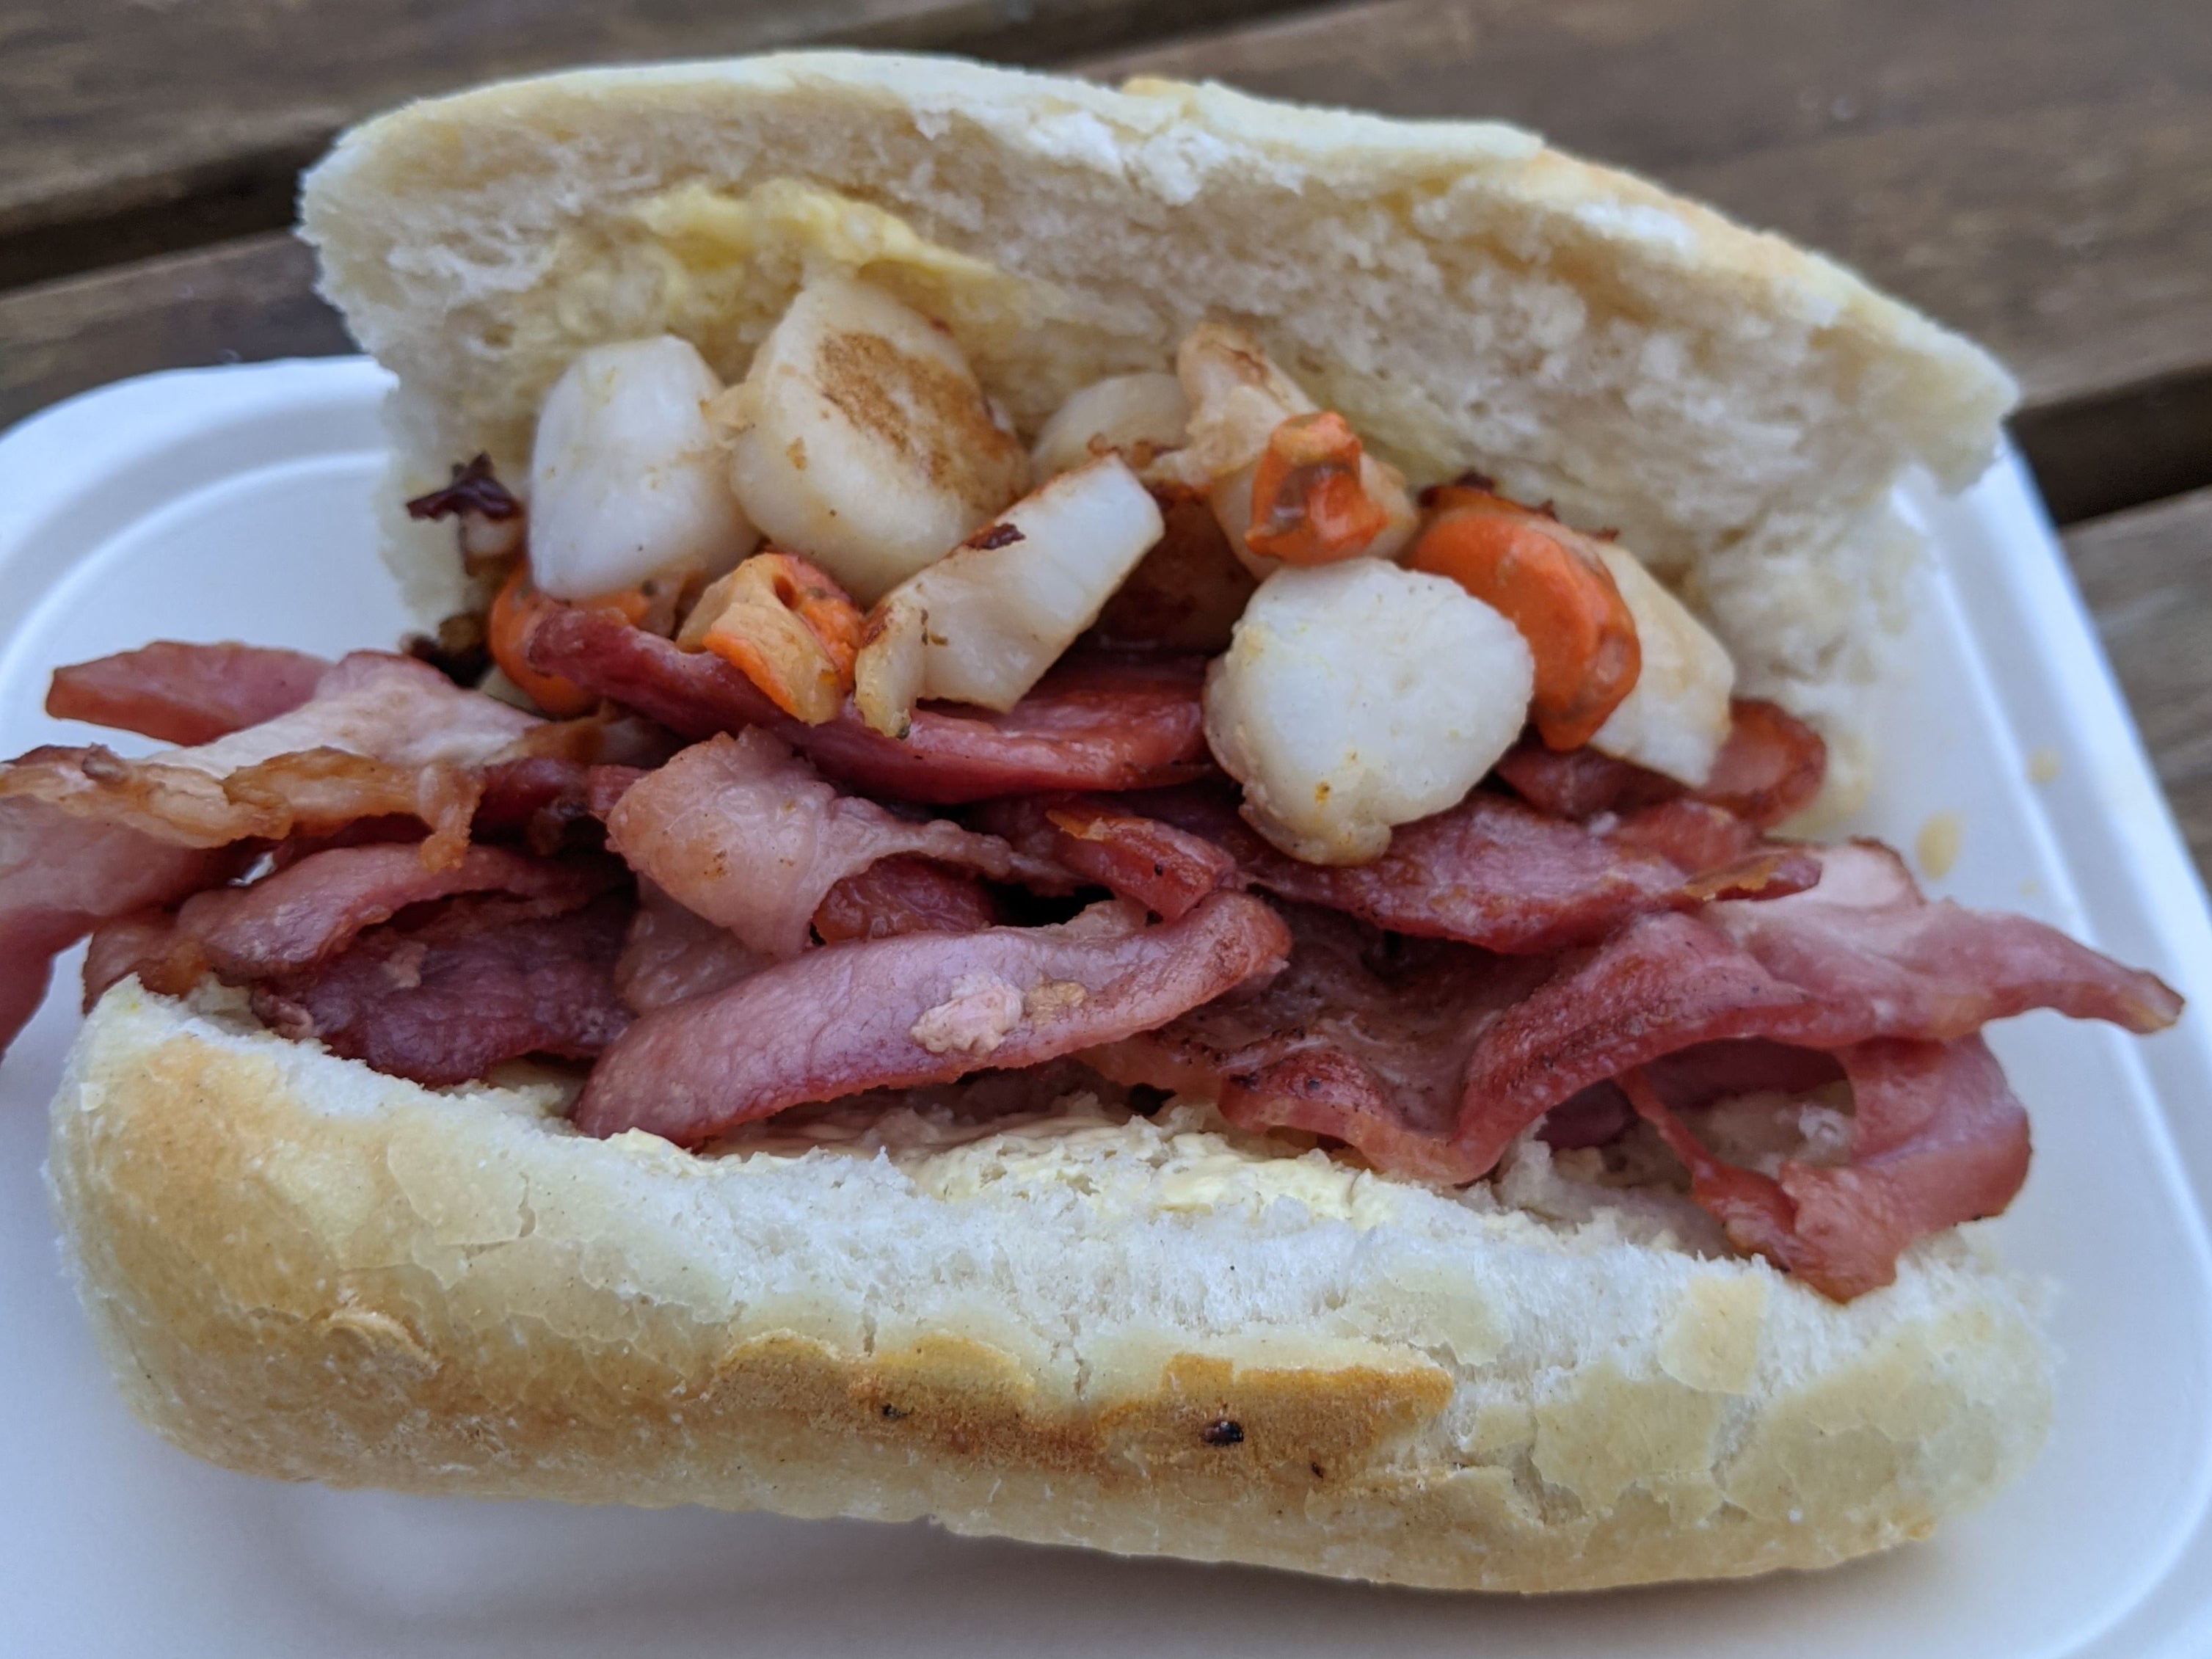 A bacon scallop roll makes for the ultimate pitstop snack